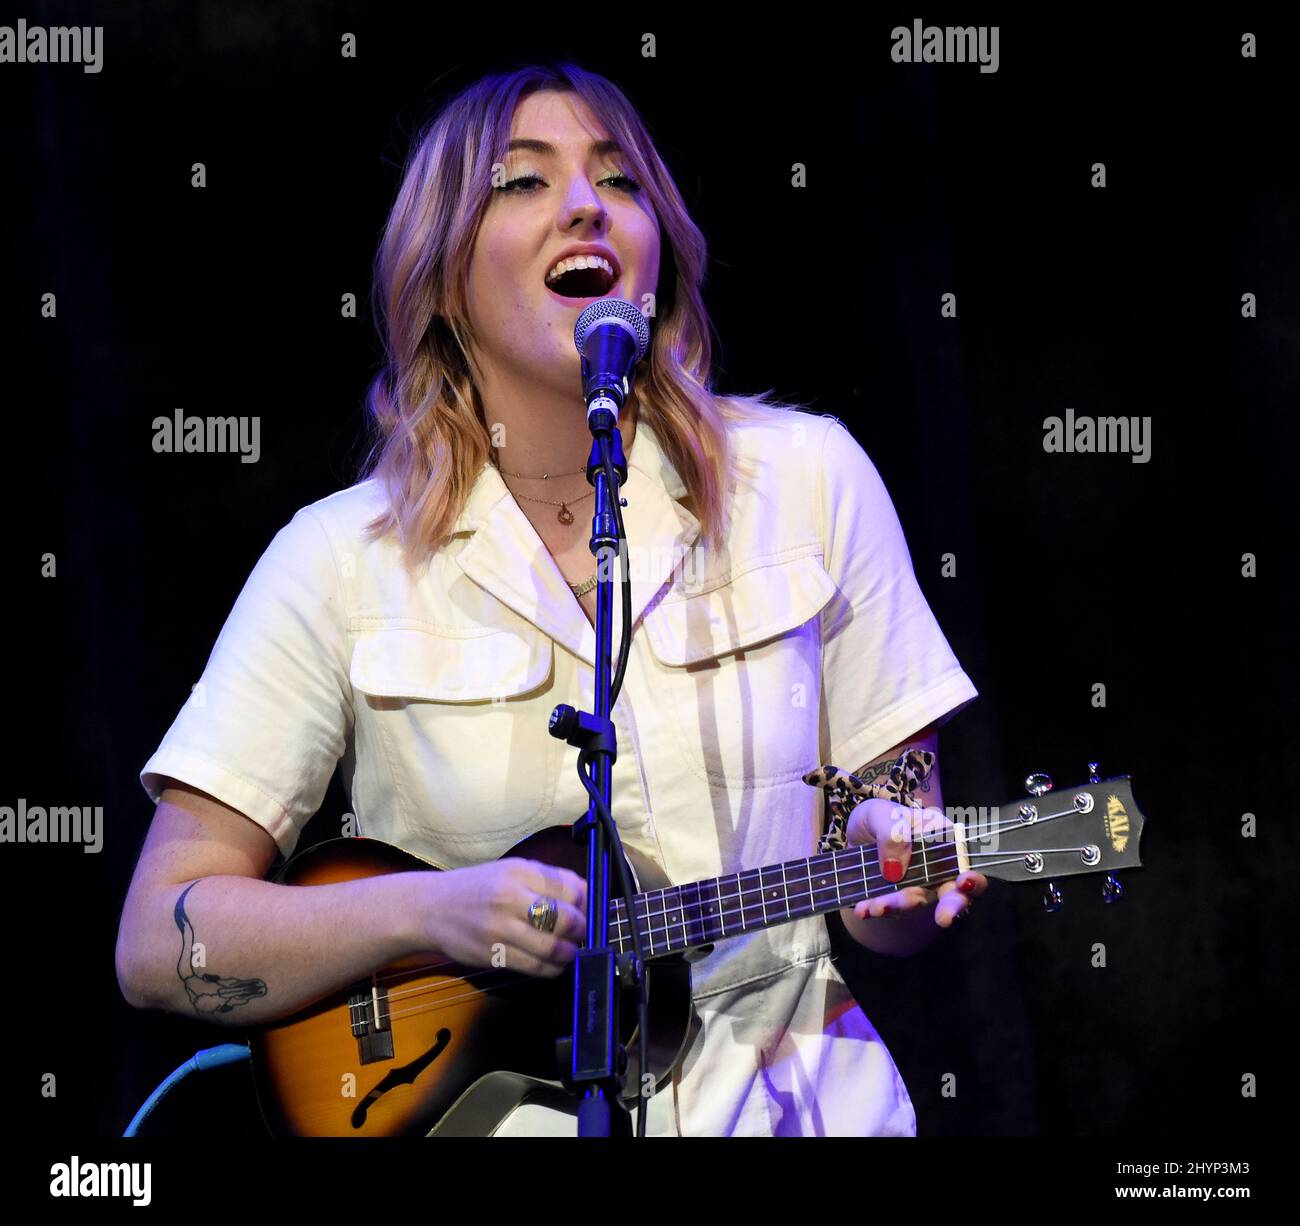 Avenue Beat, Sami Bearden onstage at the Big Machine Label Group luncheon during the Country Radio Seminar 2020 held at the Omni Nashville on February 20, 2020 in Nashville, TN. Stock Photo